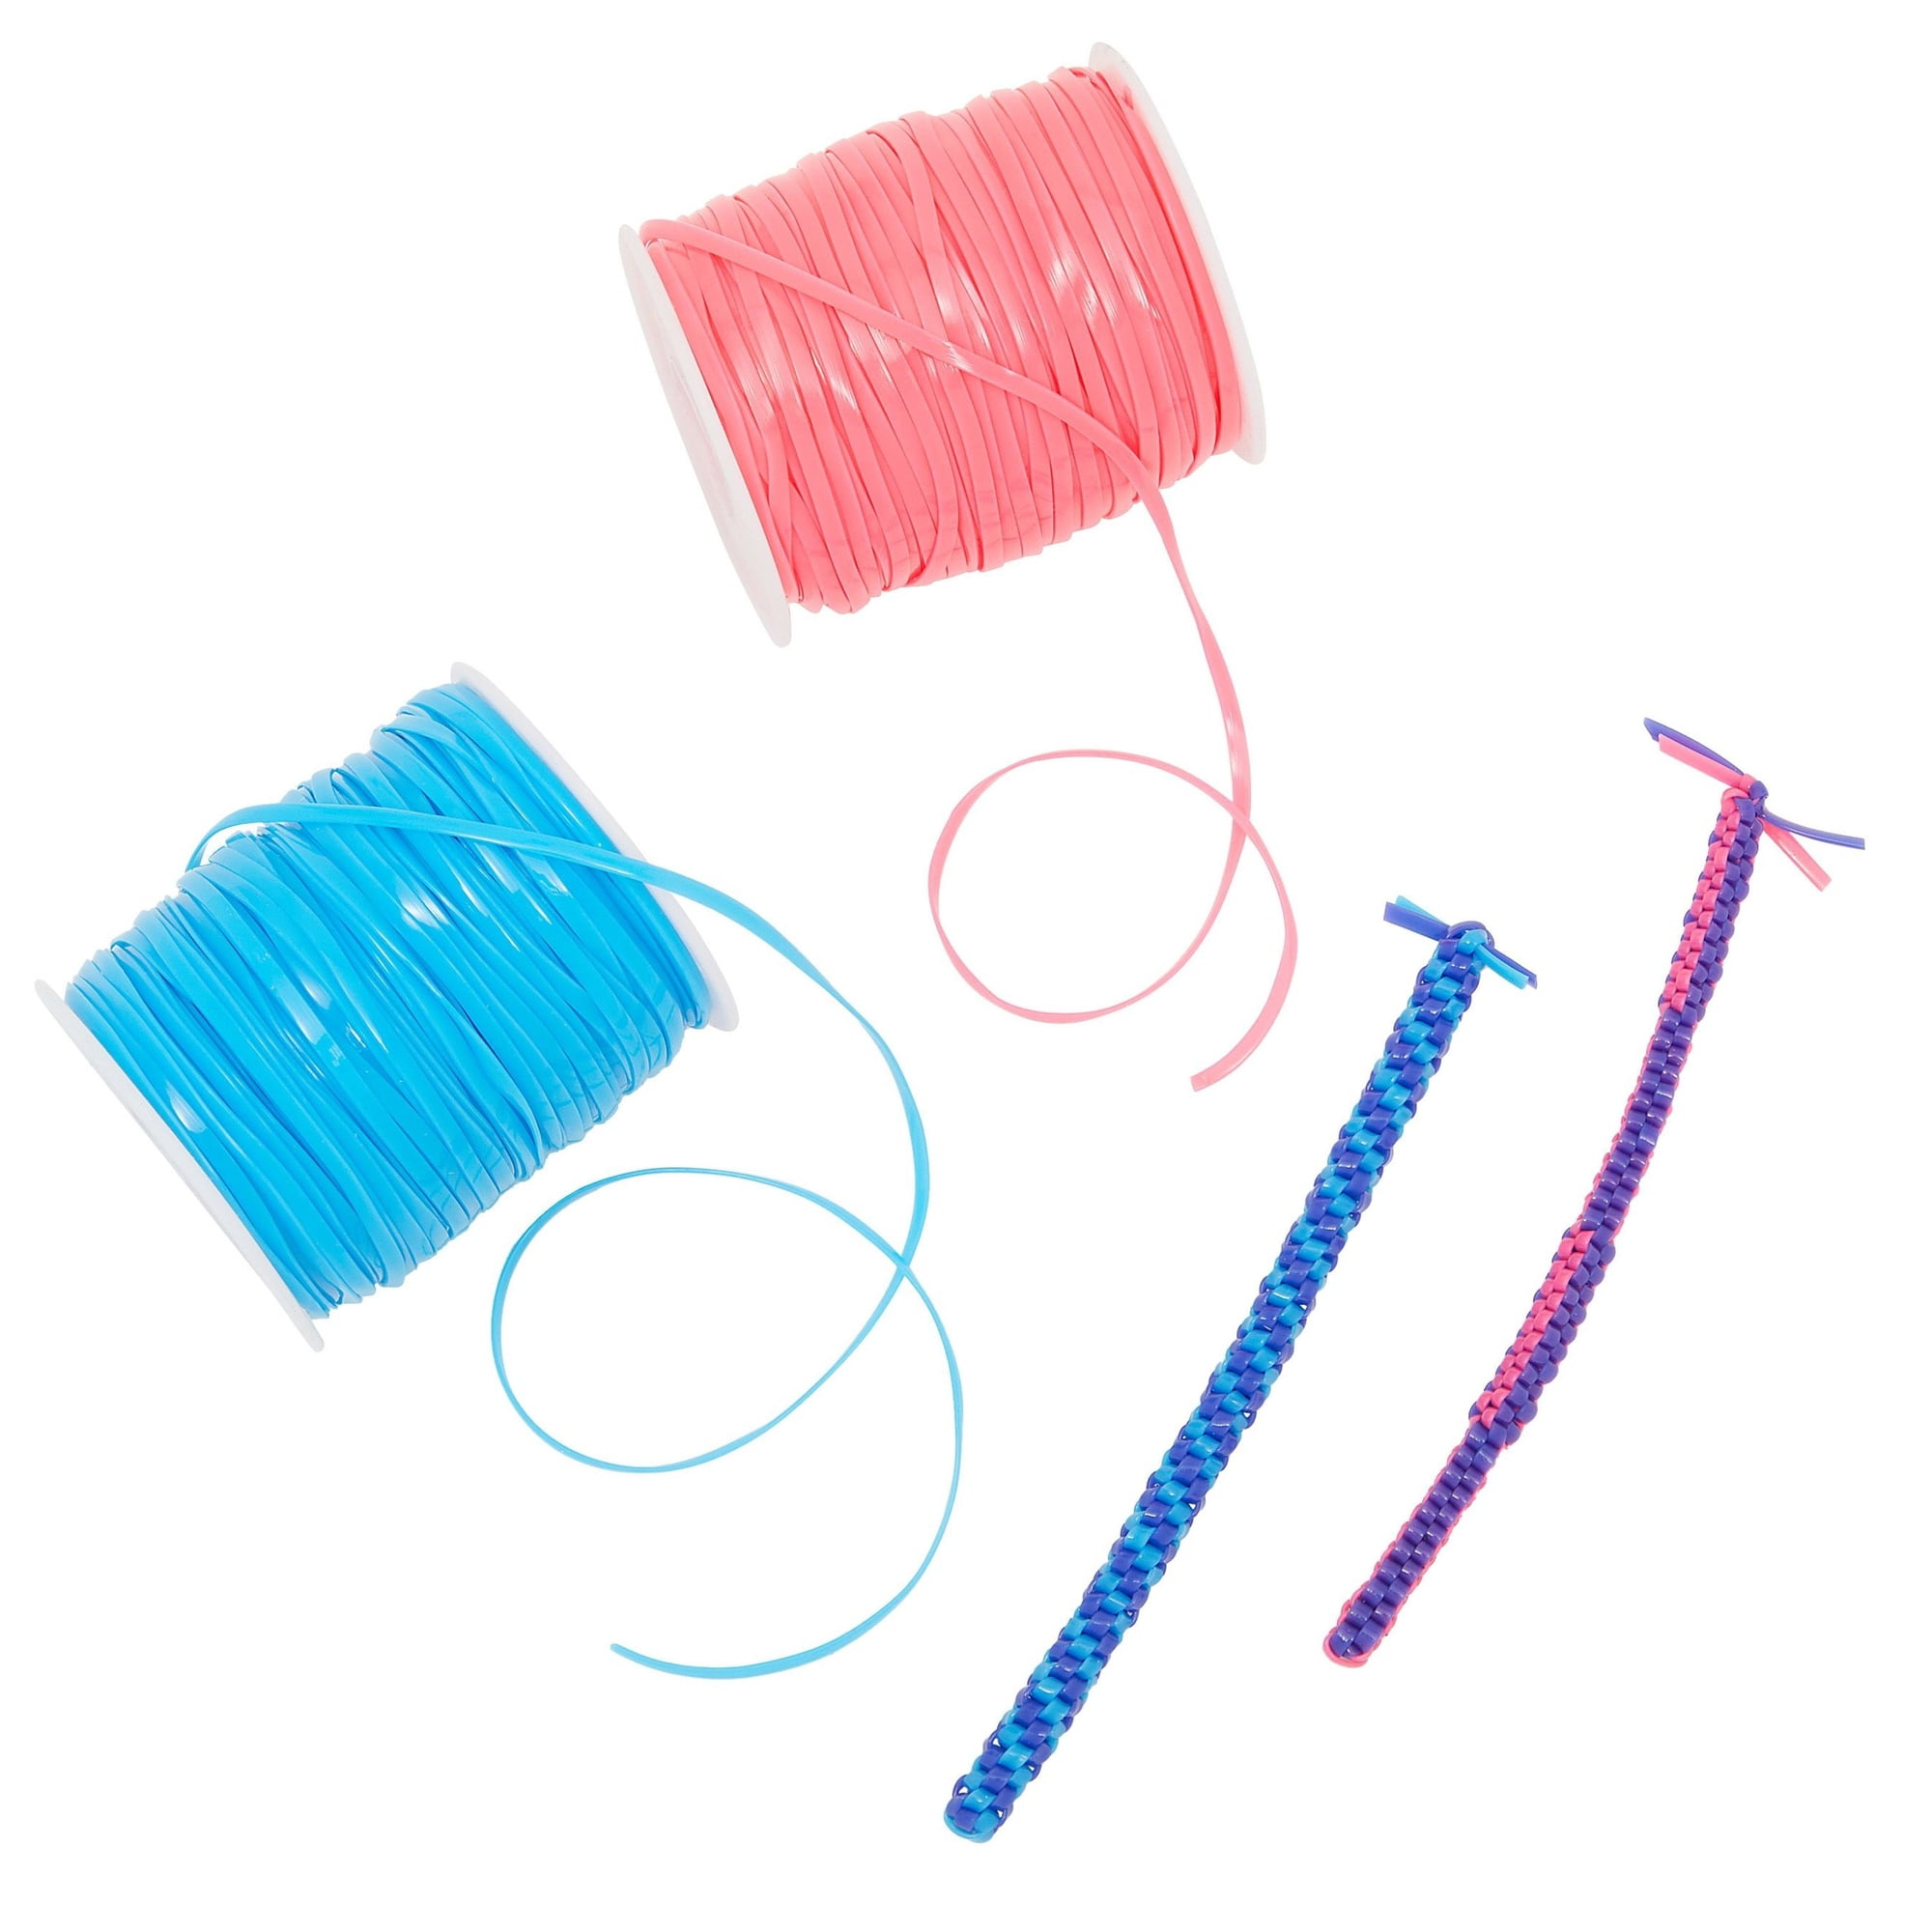 Juvale 31 Color Lanyard String Kit, Gimp String For Bracelets Boondoggle  Keychains, Plastic Cord With Rings And Hooks : Target